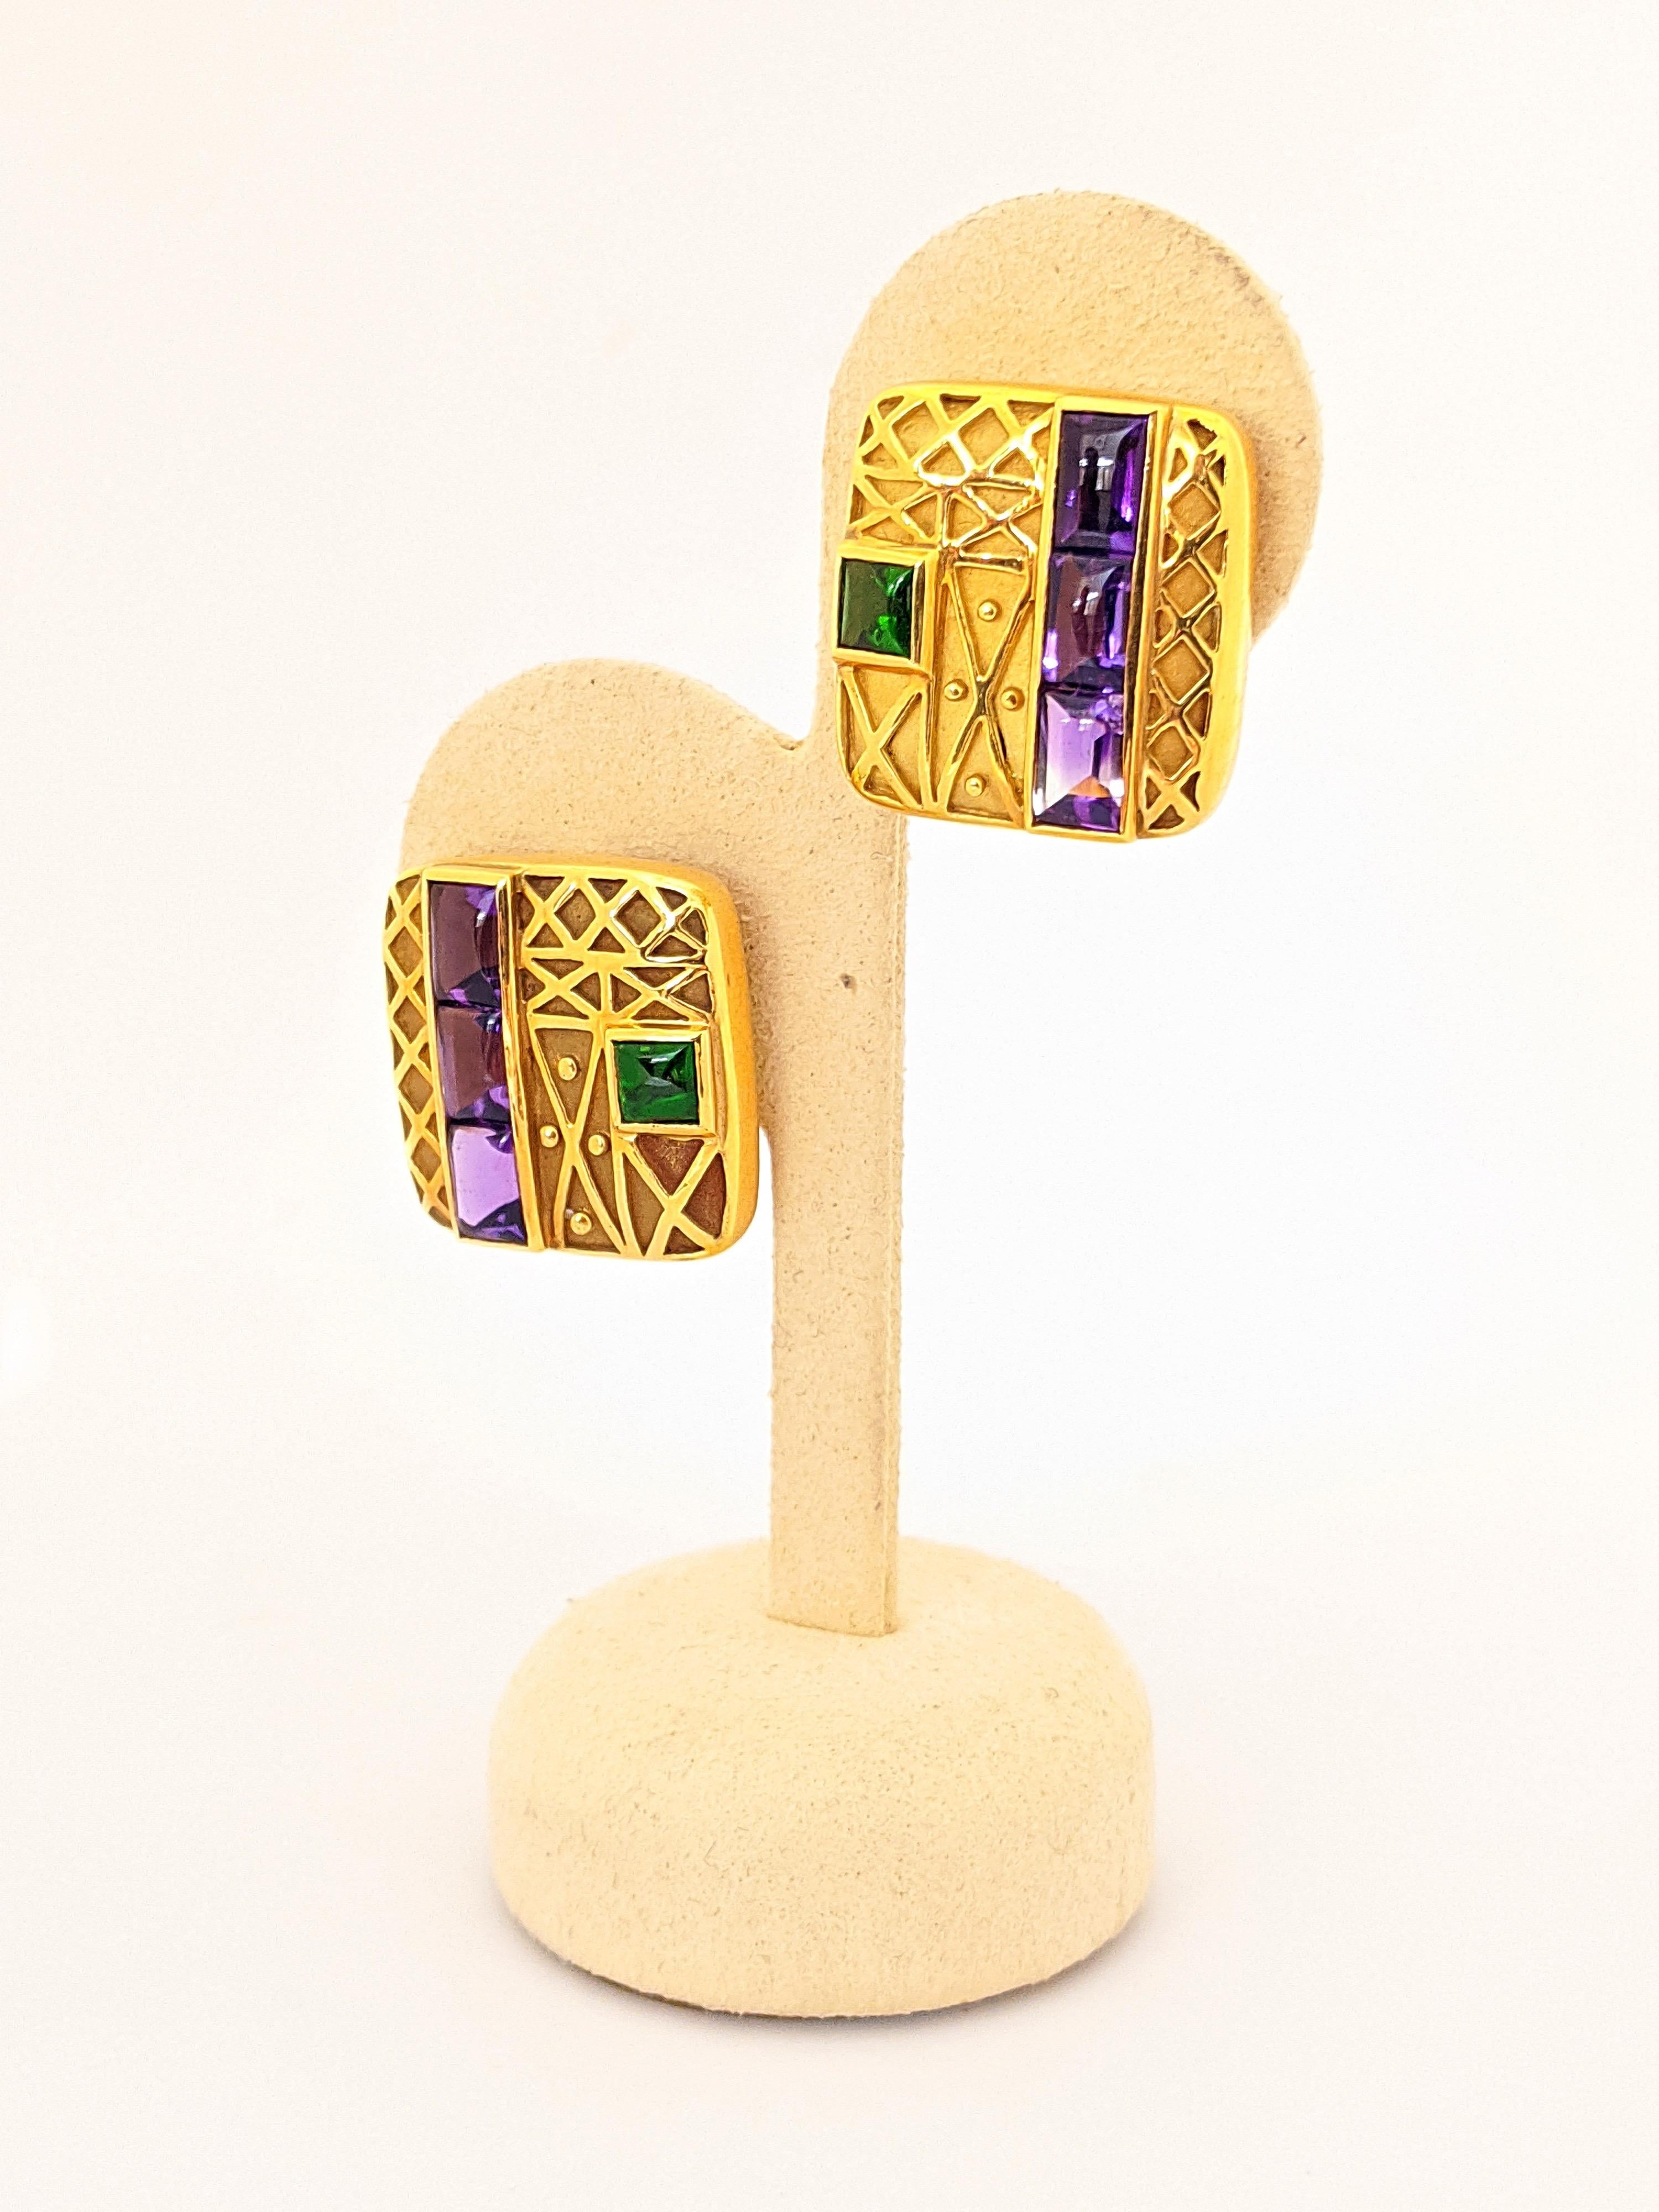 Designed by the Charles Turi for Cellini.  These square earrings are designed in 18 karat yellow gold. They have a matte finish with polished geometric shaped details. Each earring is set with sugarloaf cabachon Amethyst and Green Chrome Diopside.